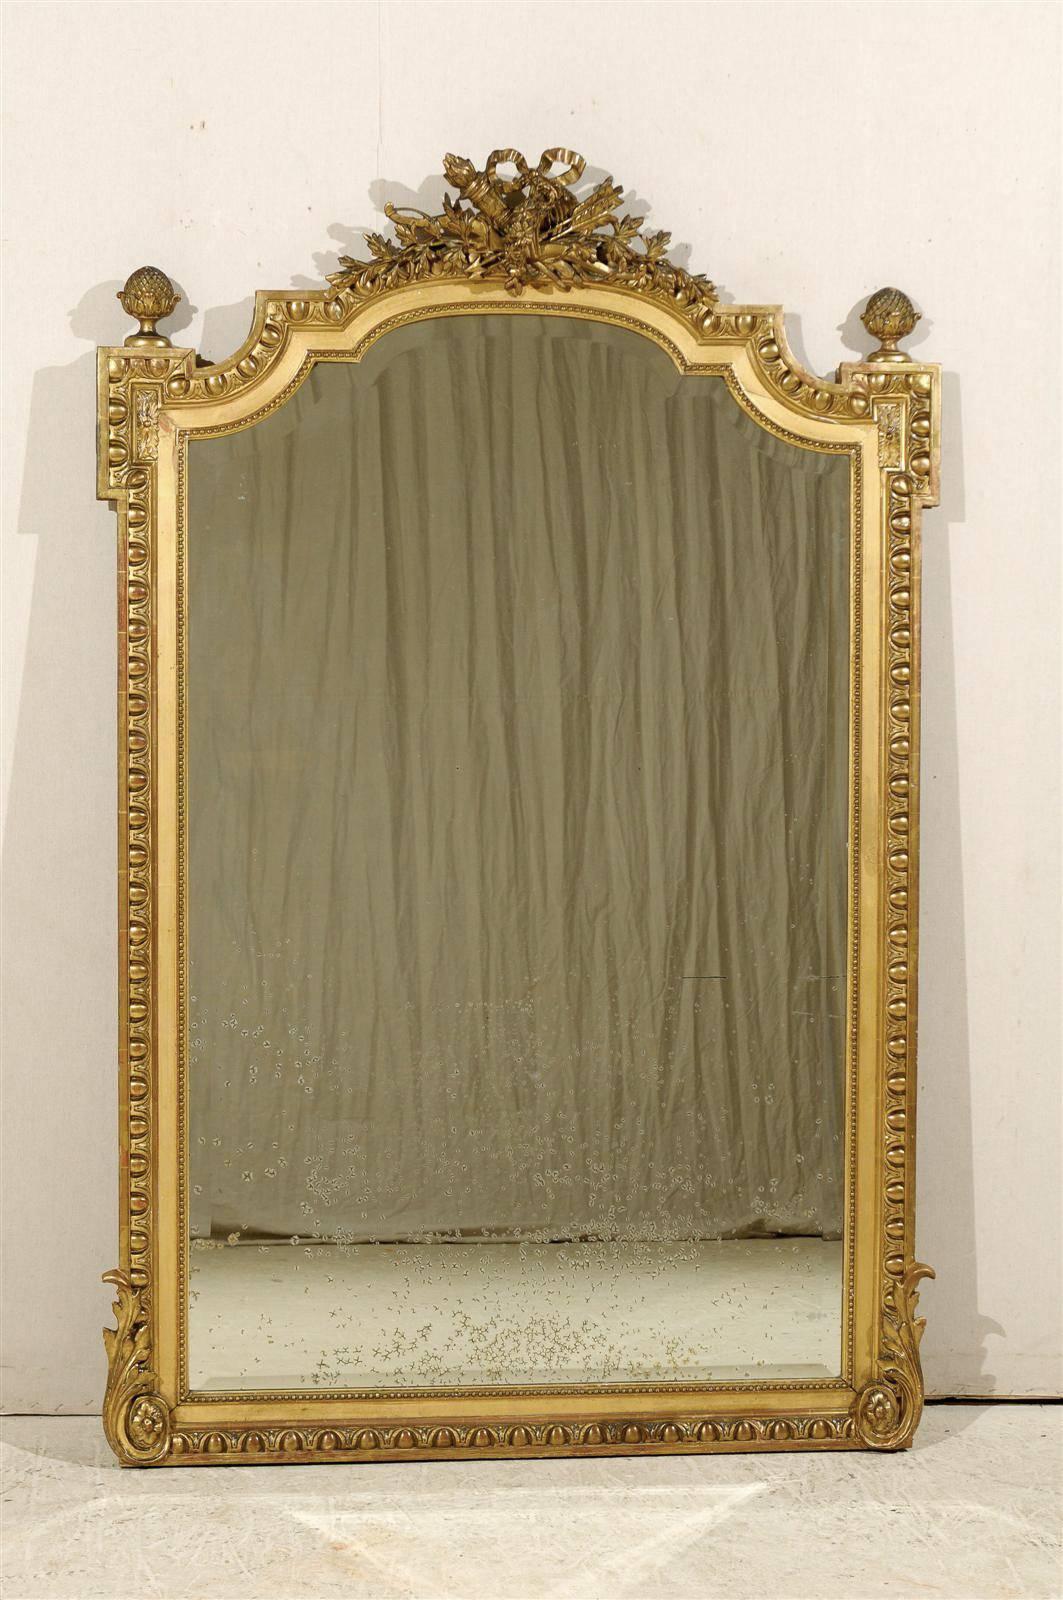 A tall French richly carved and gilt mirror from the early 20th century.  This large-sized gilded wood mirror features a crest elaborately adorn with a bow-tie, ribbons, arrows and torches, flanked within pine cone finials at each shoulder.  An egg